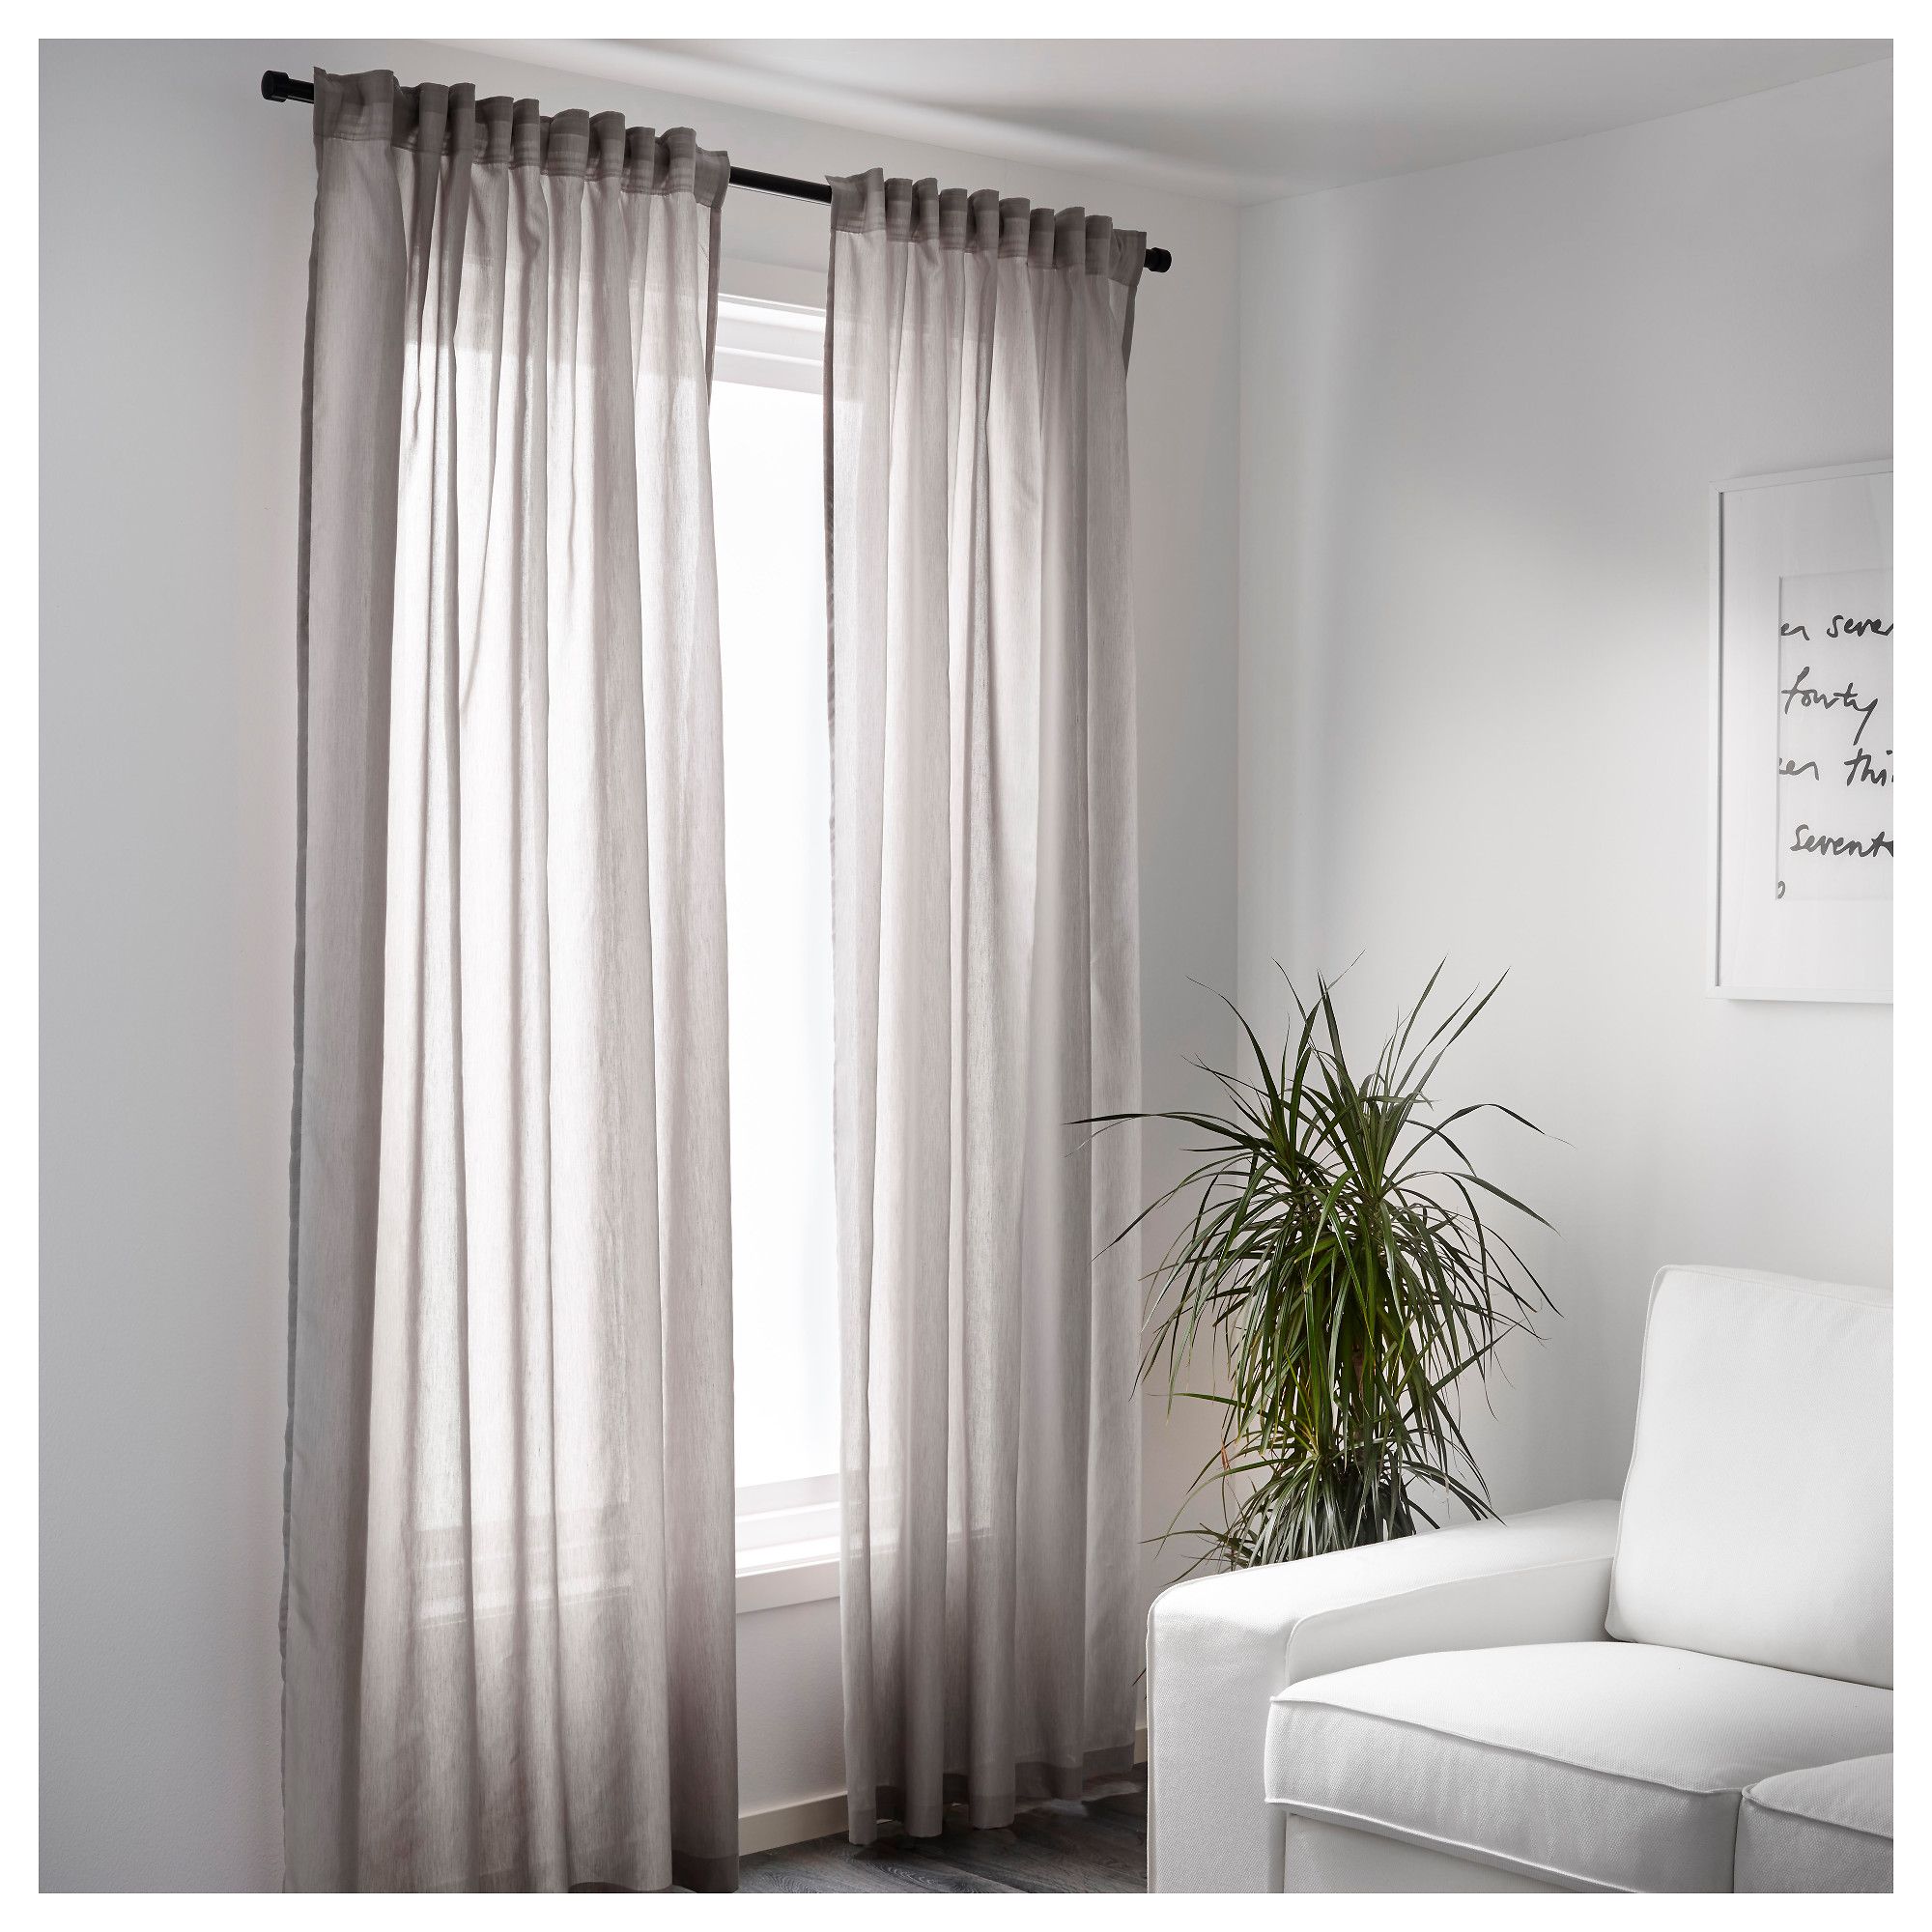 IKEA - VIVAN Curtains, 1 pair gray | Front rooms, Basements and Bedrooms